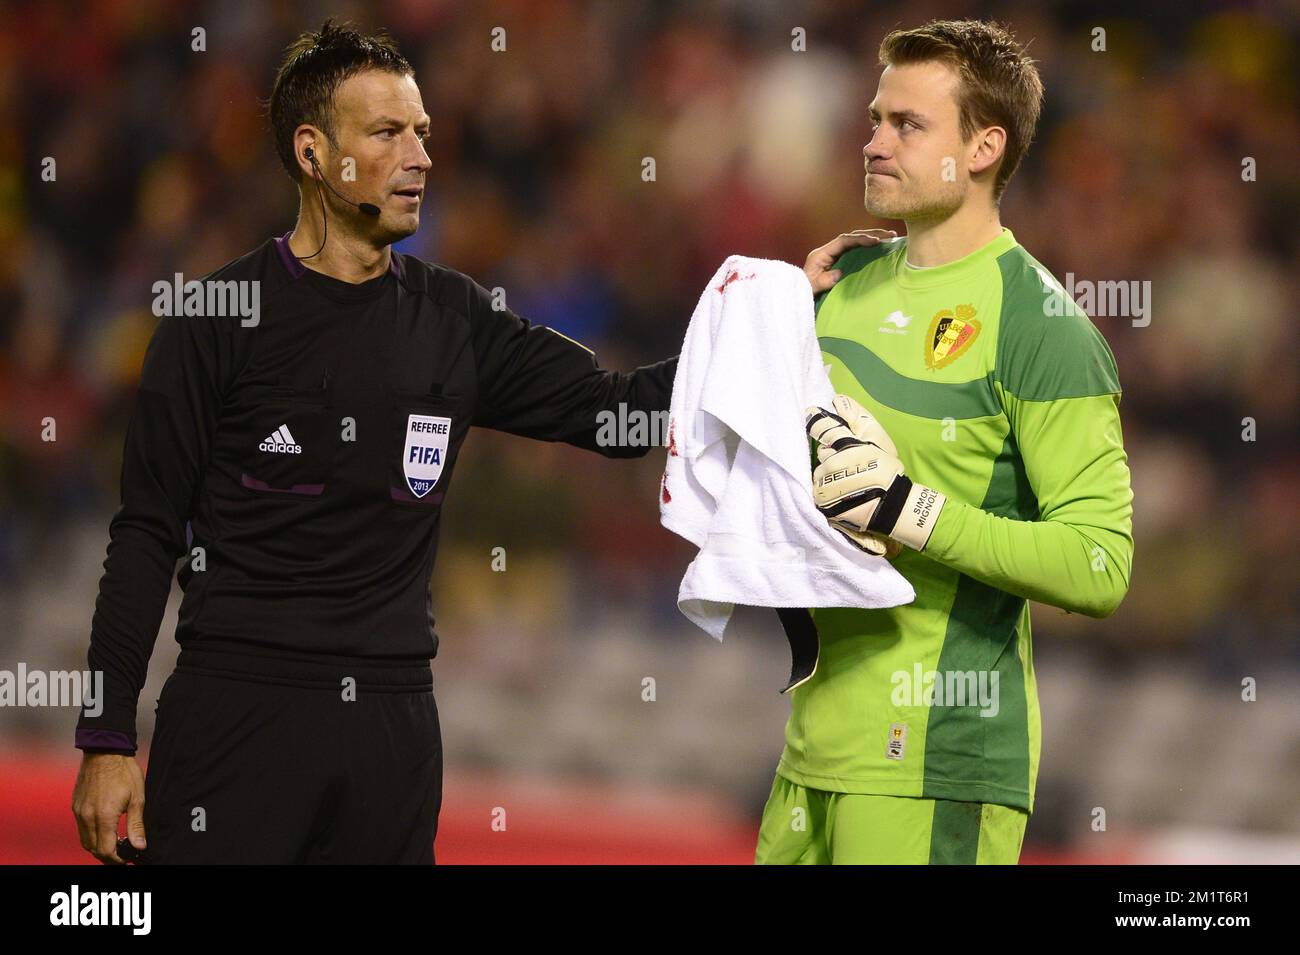 Referee Mark Clattenburg and Belgium's goalkeeper Simon Mignolet pictured during a friendly soccer game between the Belgian national soccer team Red Devils and Colombia, at the Koning Boudewijn Stadion - Stade Roi Baudouin in Brussels, on Thursday 14 November 2013. BELGA PHOTO YORICK JANSENS Stock Photo